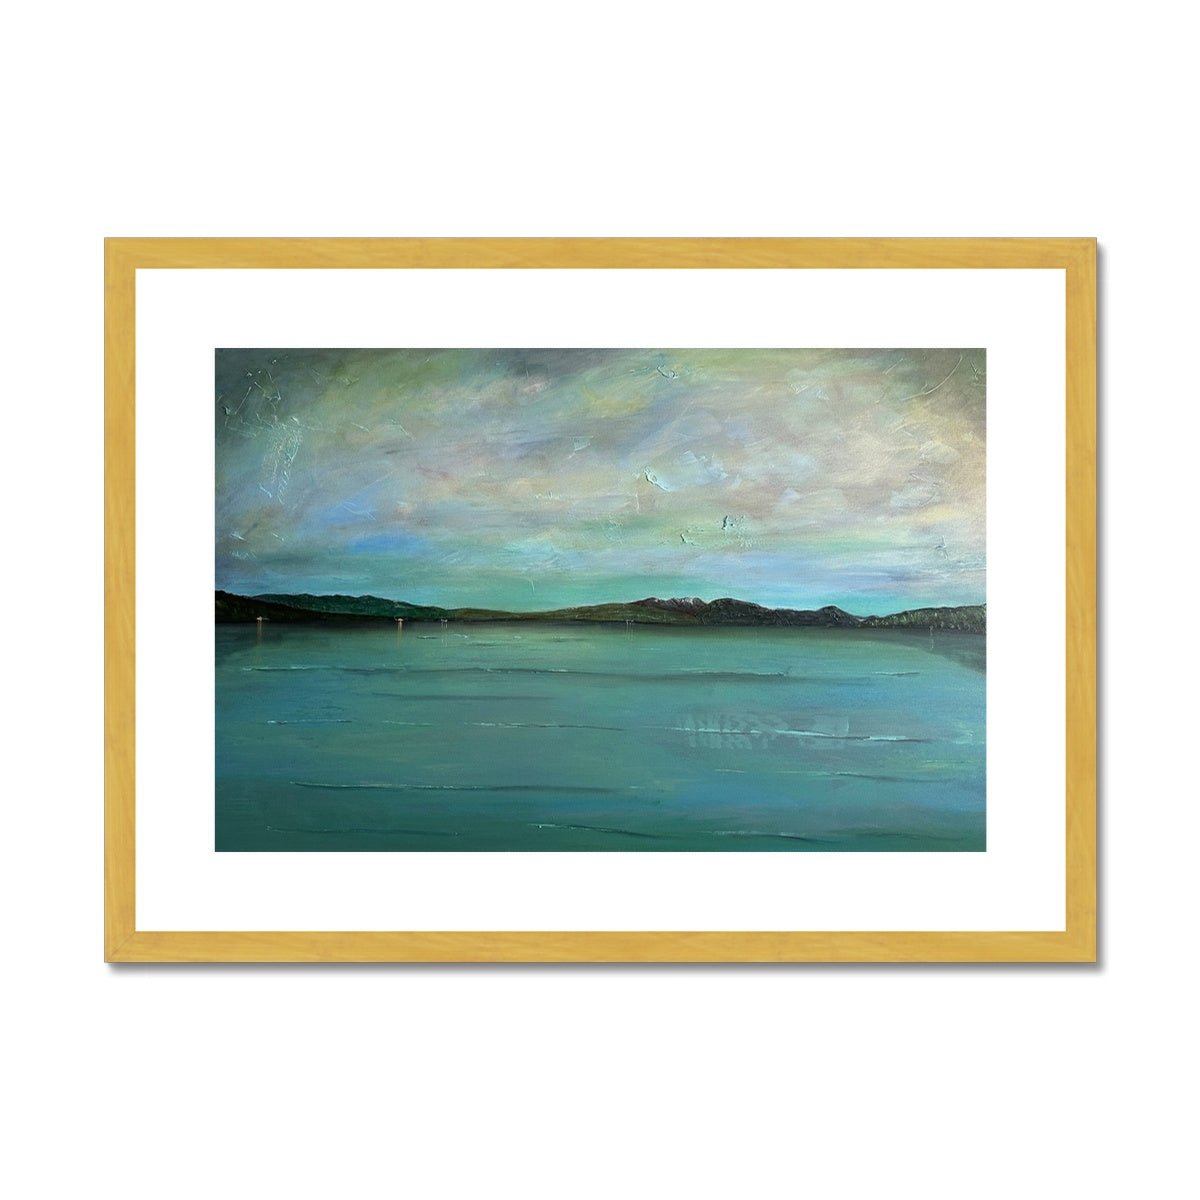 An Emerald Loch Lomond Painting | Antique Framed & Mounted Prints From Scotland-Antique Framed & Mounted Prints-Scottish Lochs & Mountains Art Gallery-A2 Landscape-Gold Frame-Paintings, Prints, Homeware, Art Gifts From Scotland By Scottish Artist Kevin Hunter